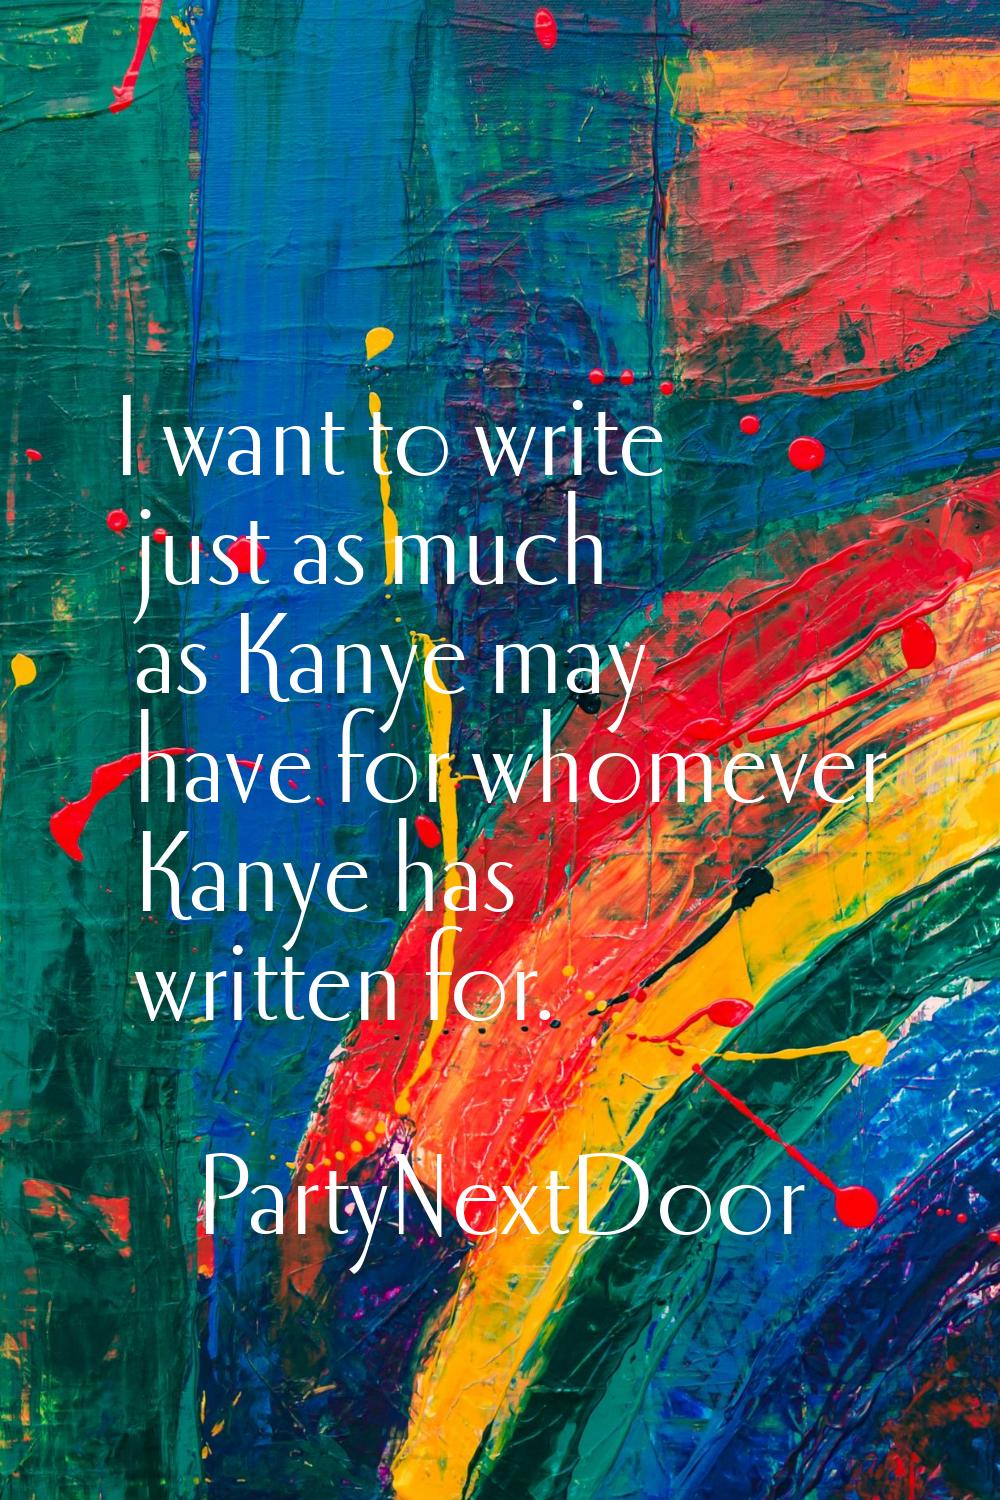 I want to write just as much as Kanye may have for whomever Kanye has written for.